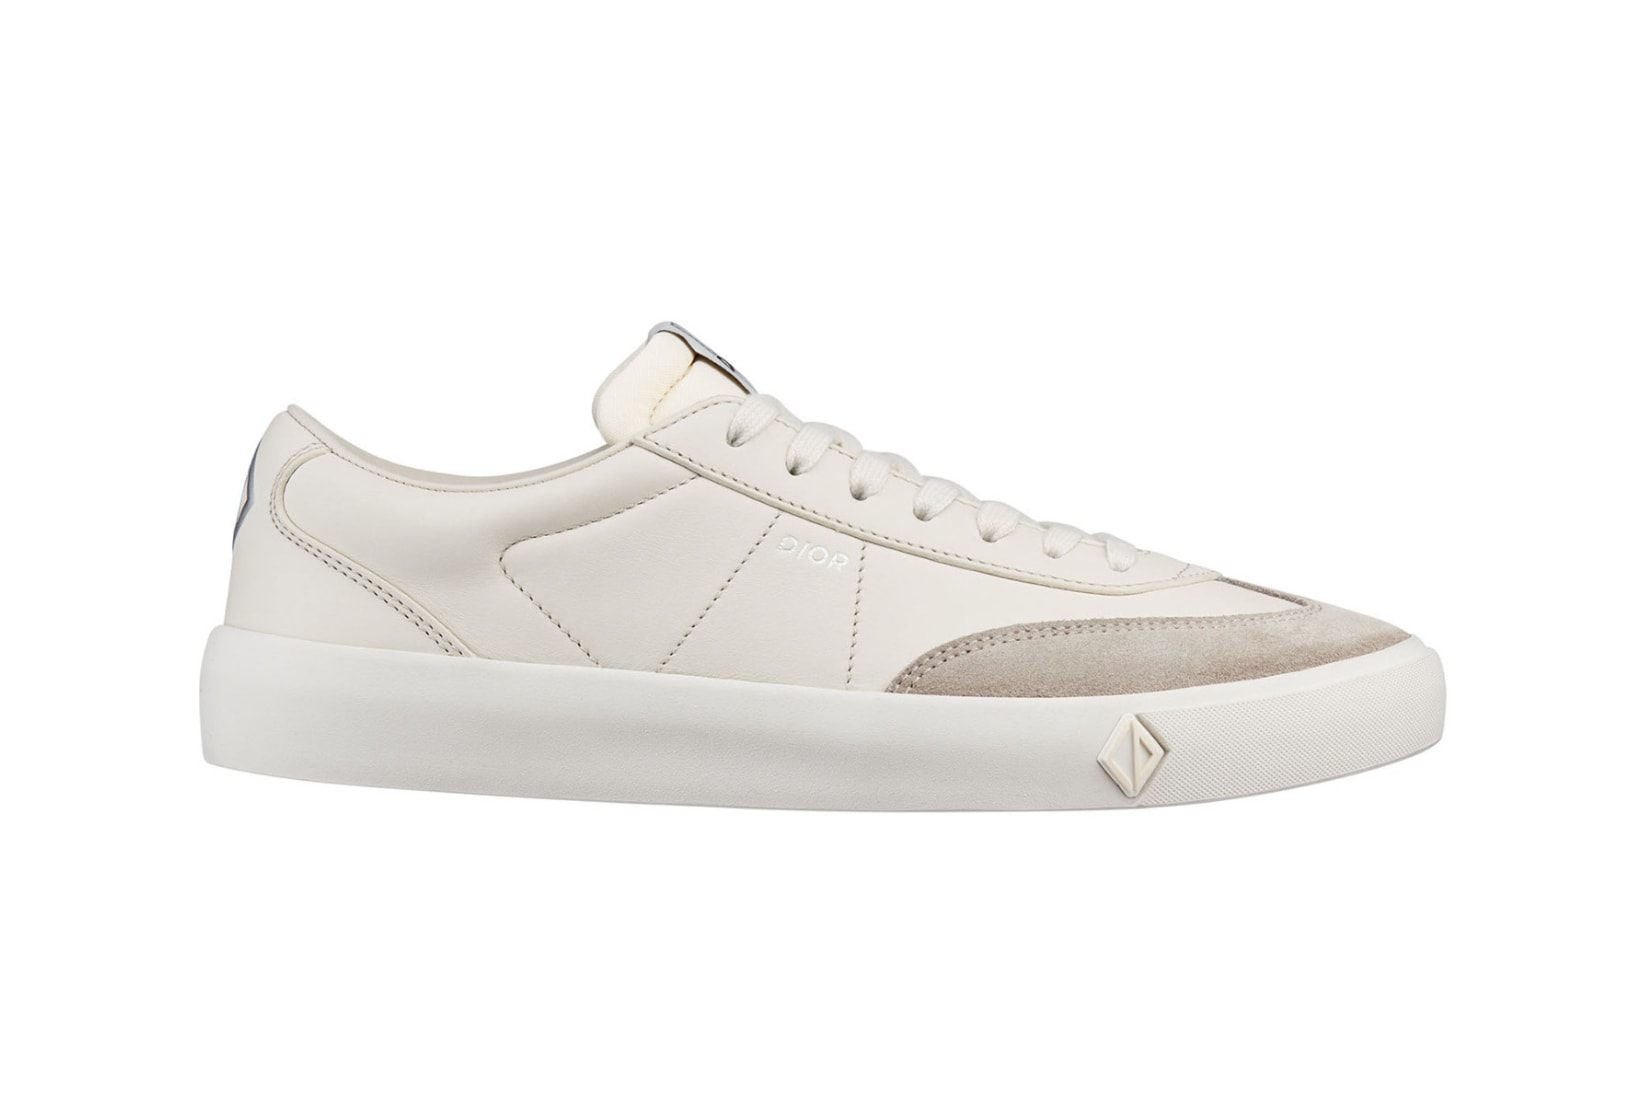 Dior Releases Neutral-Toned B101 Sneakers 